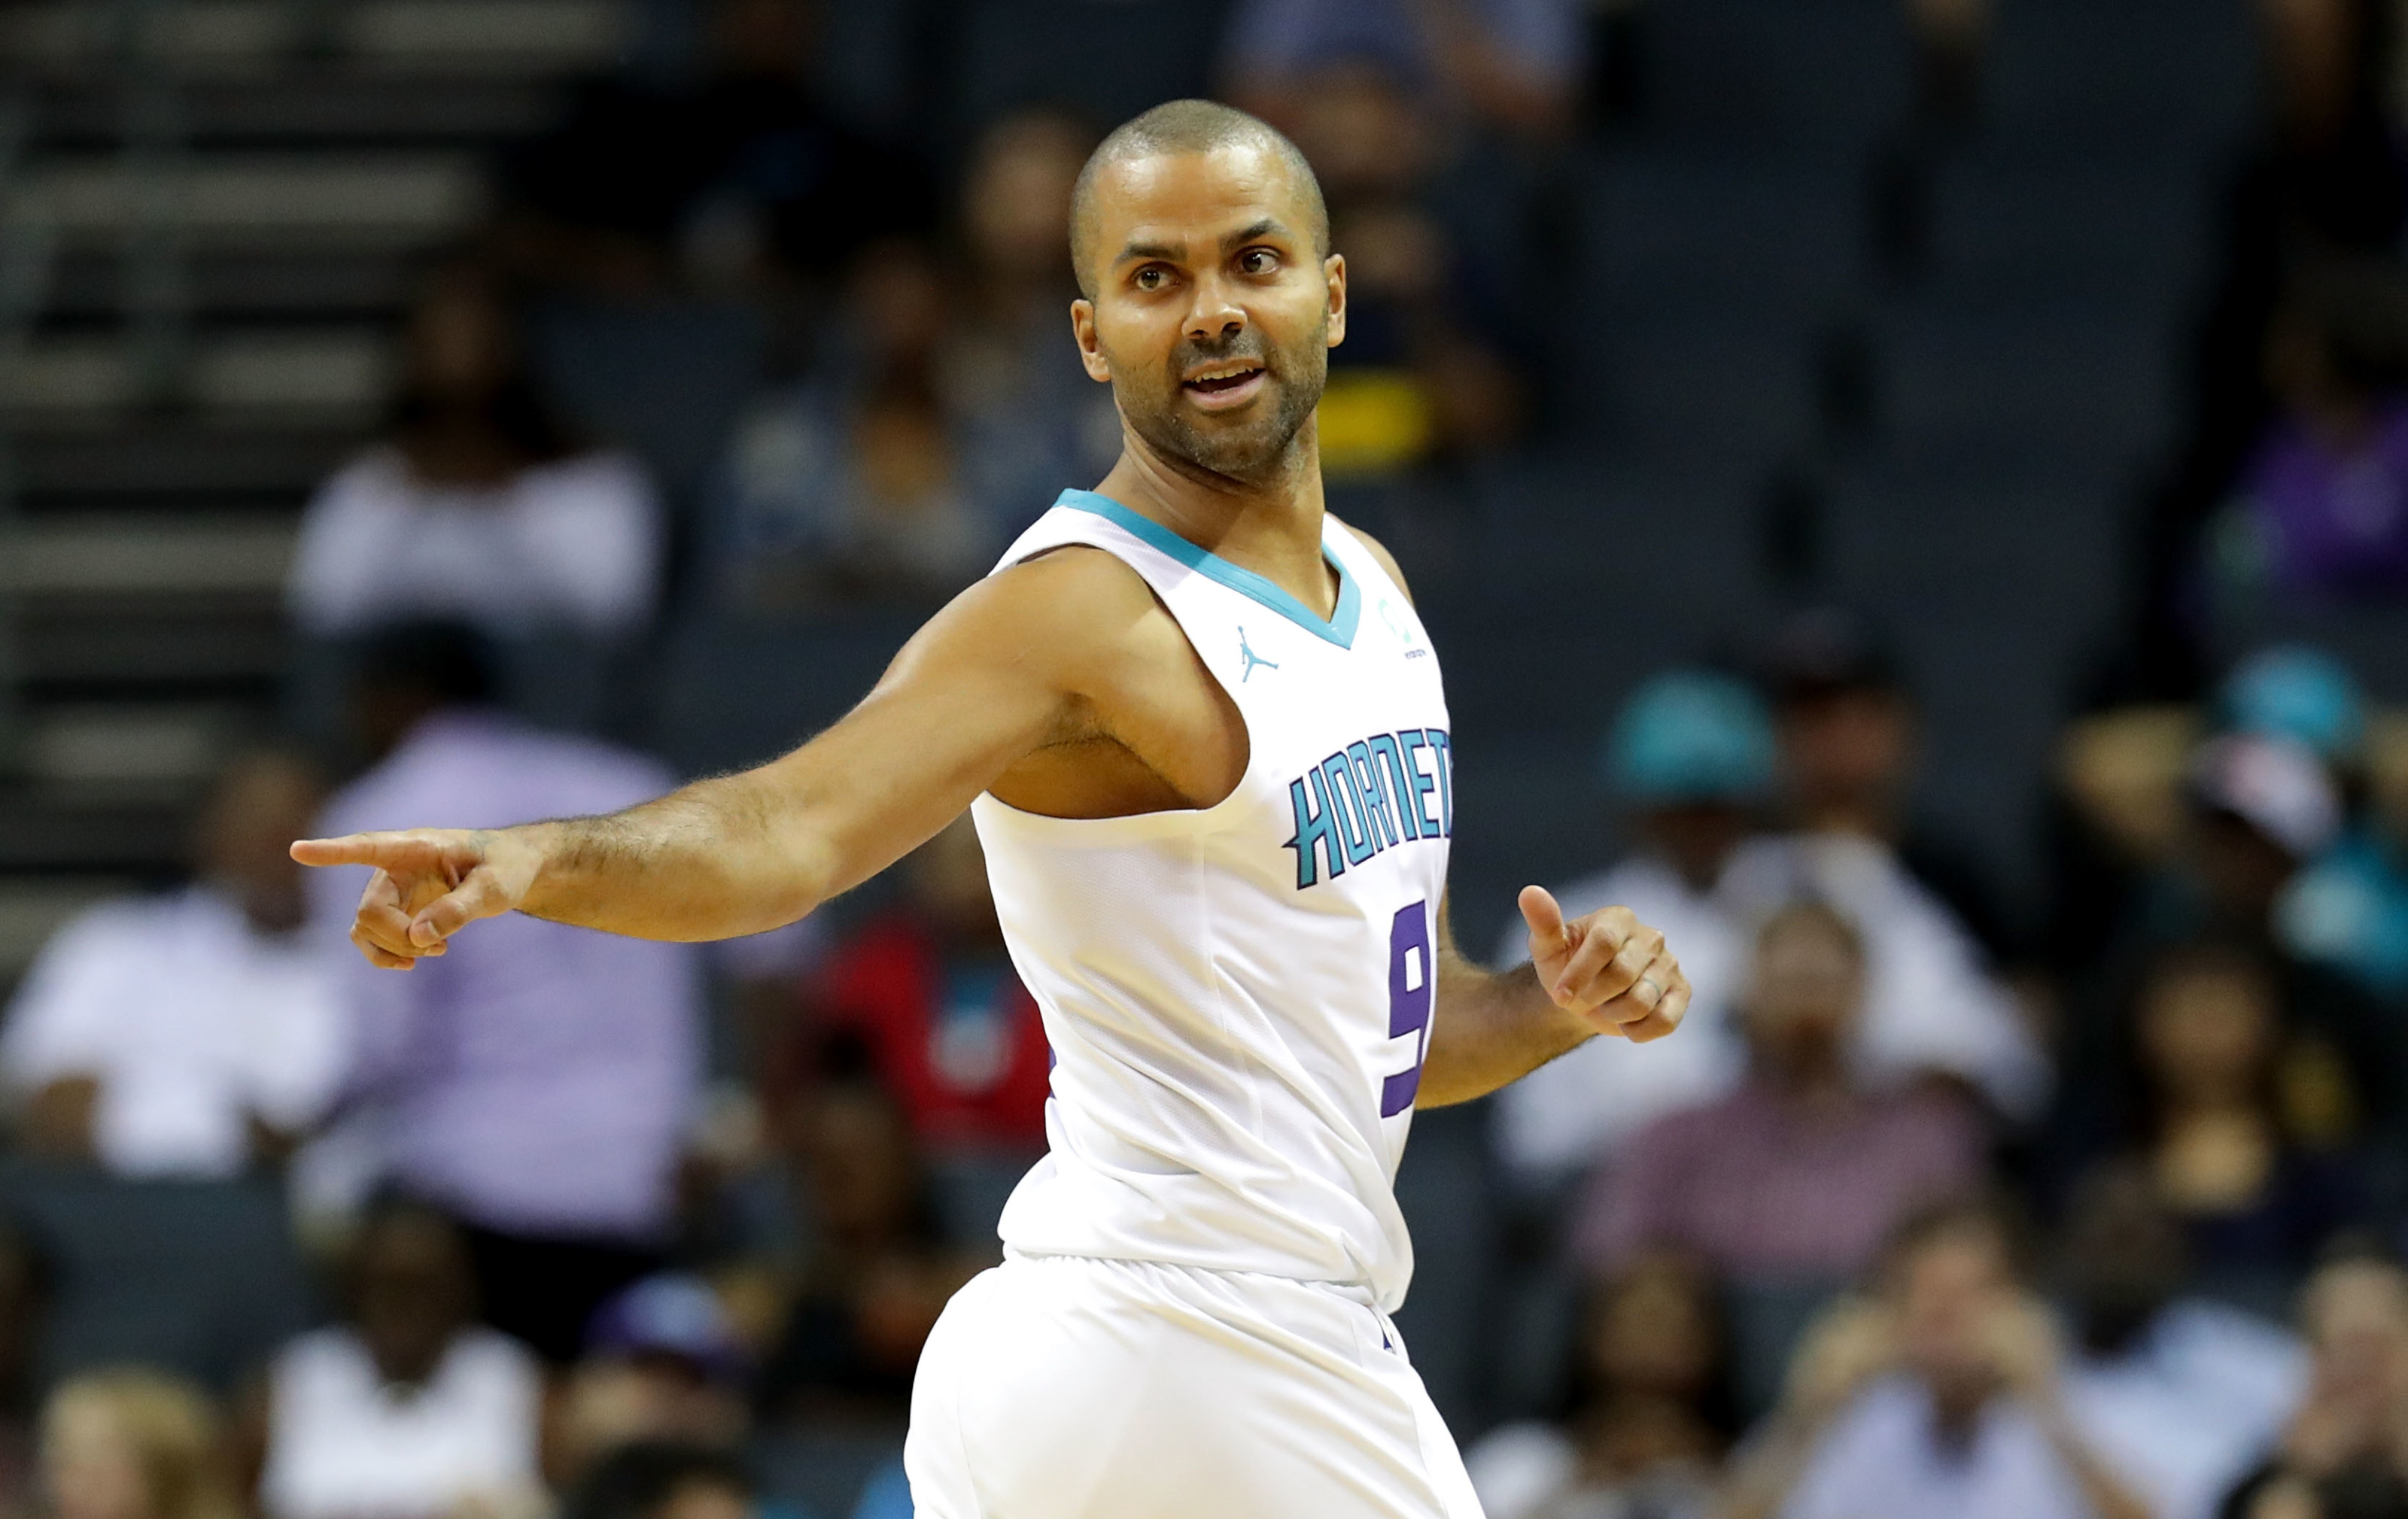 Tony Parker says he's retiring from NBA after 18 seasons